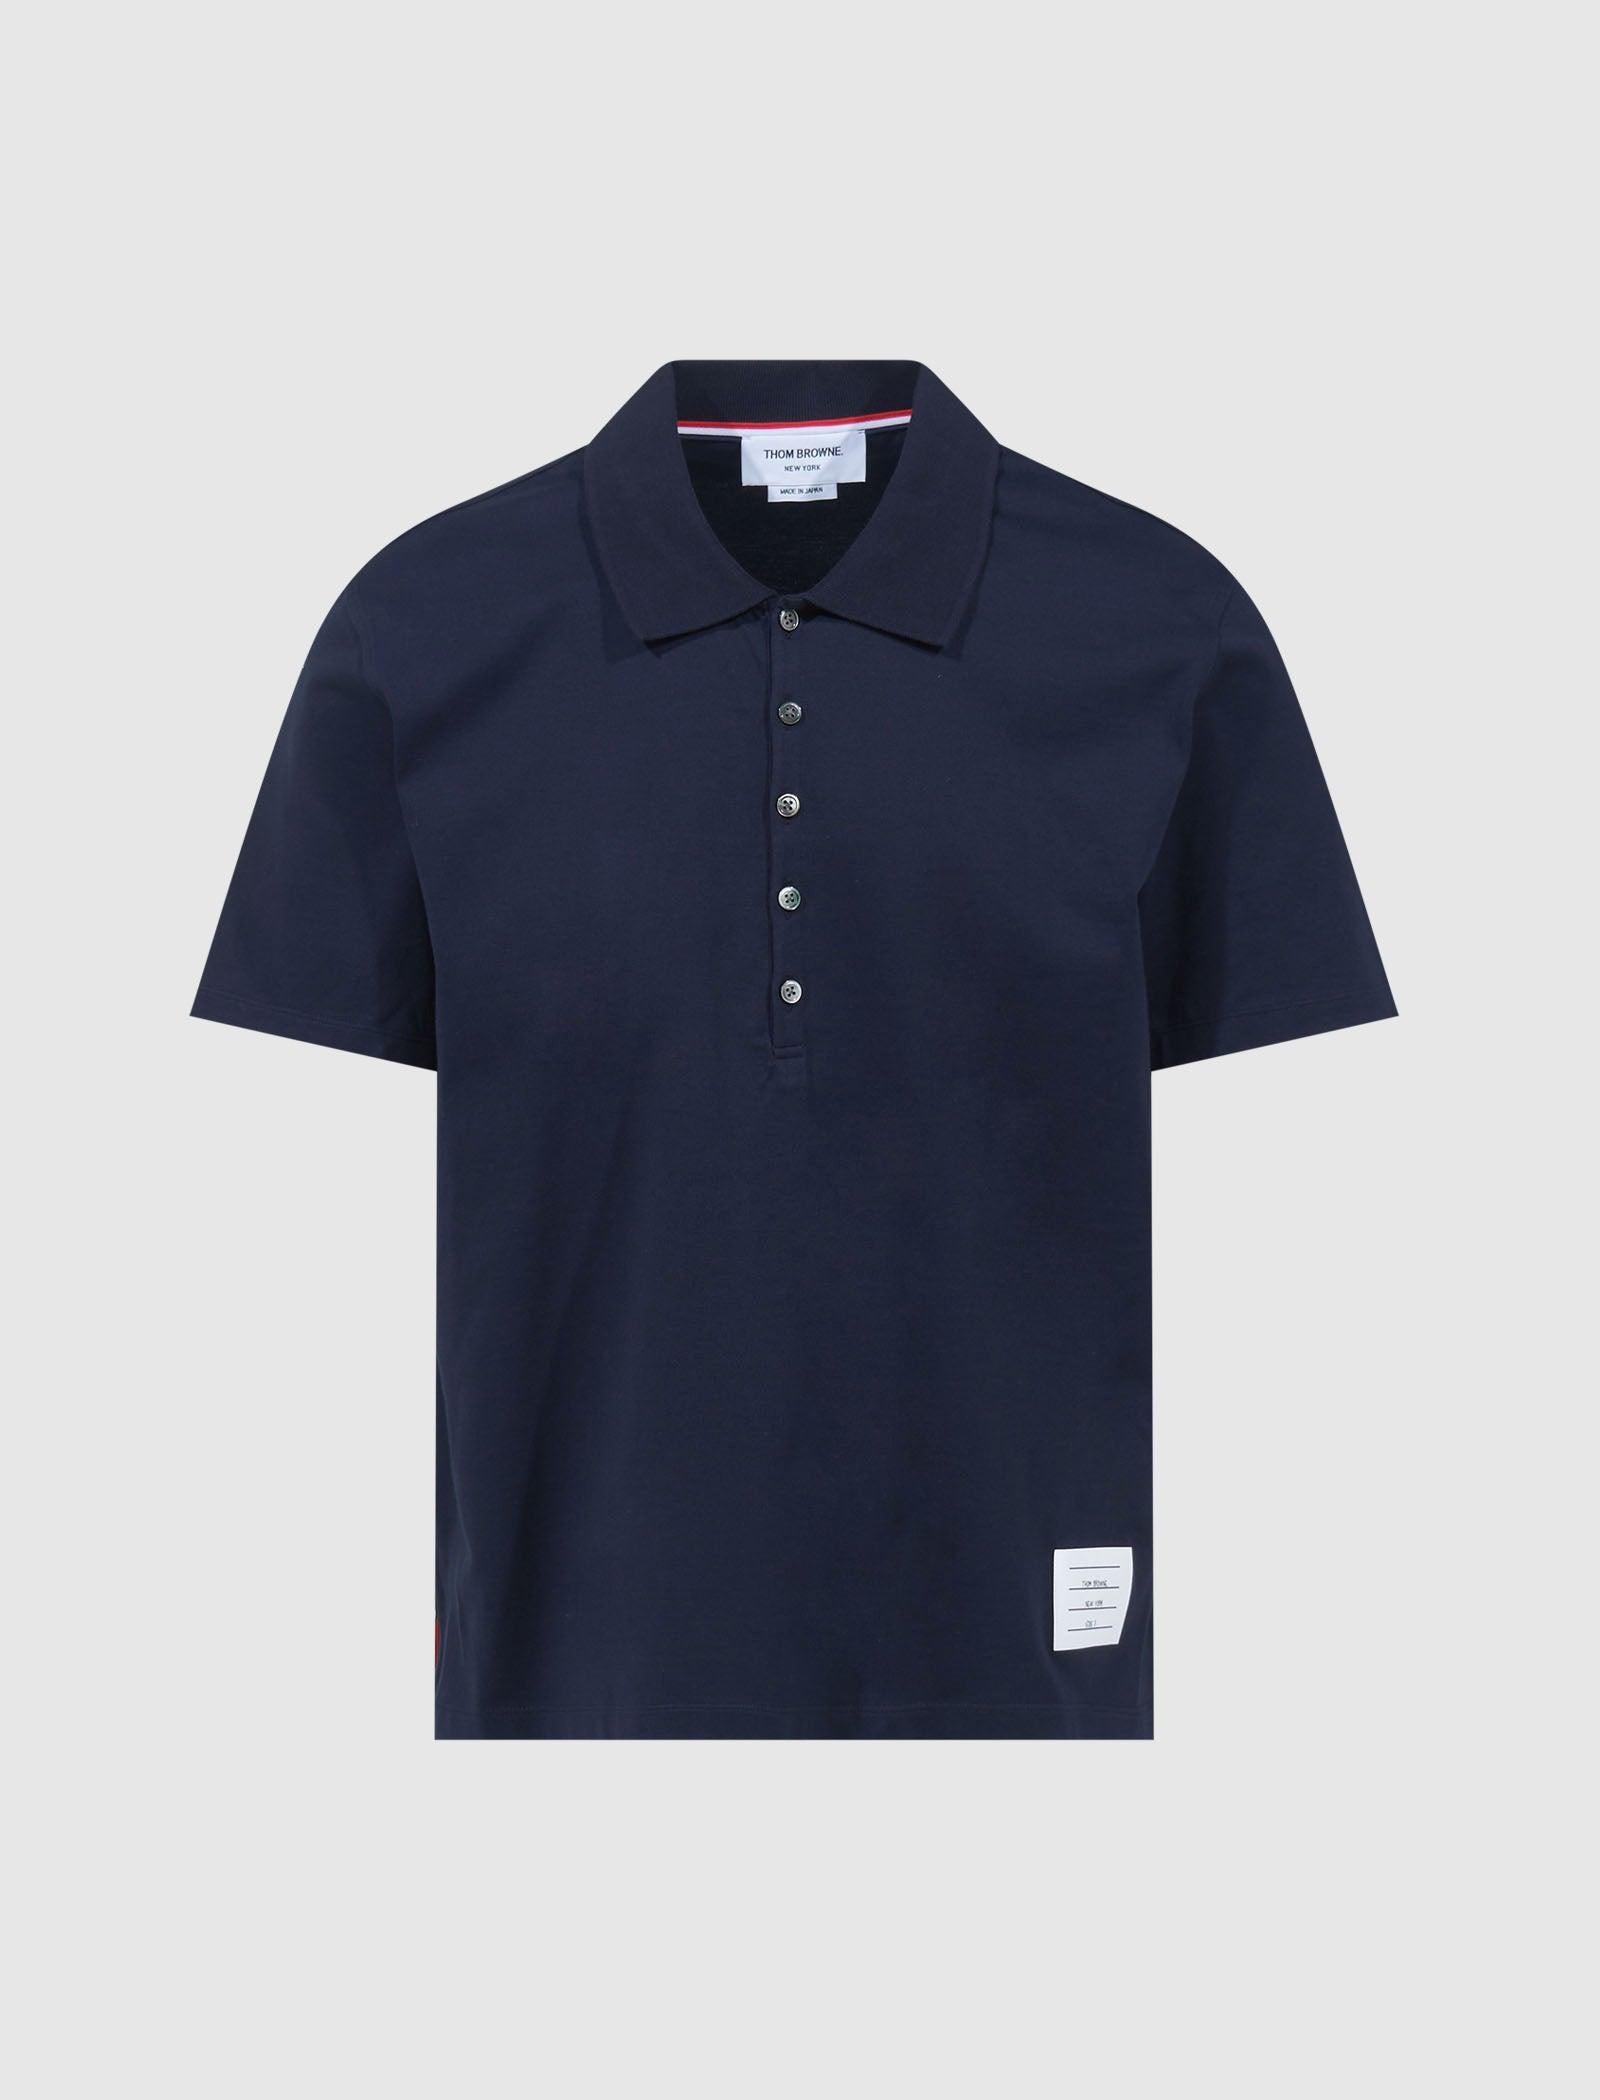 THOM BROWNE RELAXED FIT POLO – A Ma Maniere